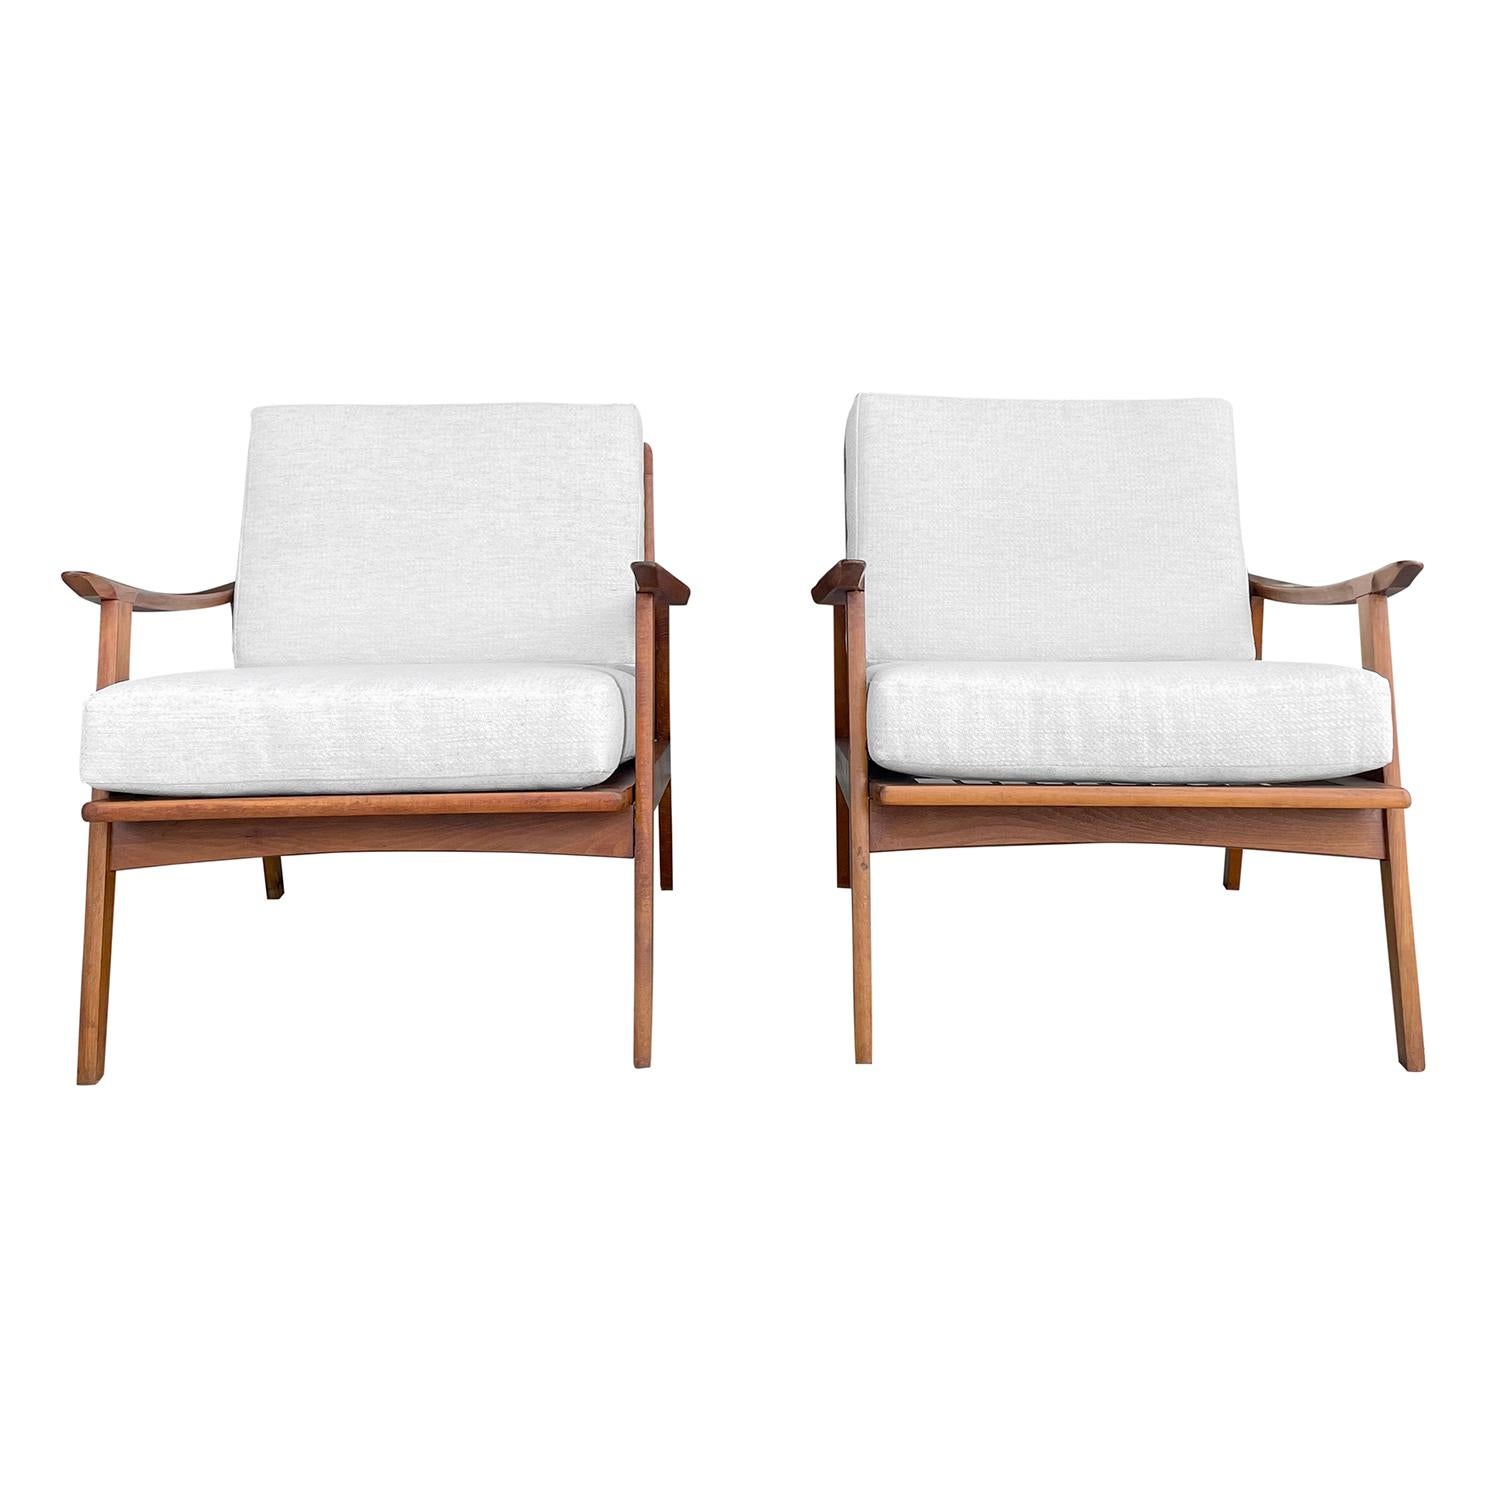 A vintage Mid-Century modern Danish pair of open armchairs made of hand crafted polished Teakwood, designed by Kai Kristiansen in good condition. The back rest of the Scandinavian low back lounge chairs are spindled and curved with slim, arched